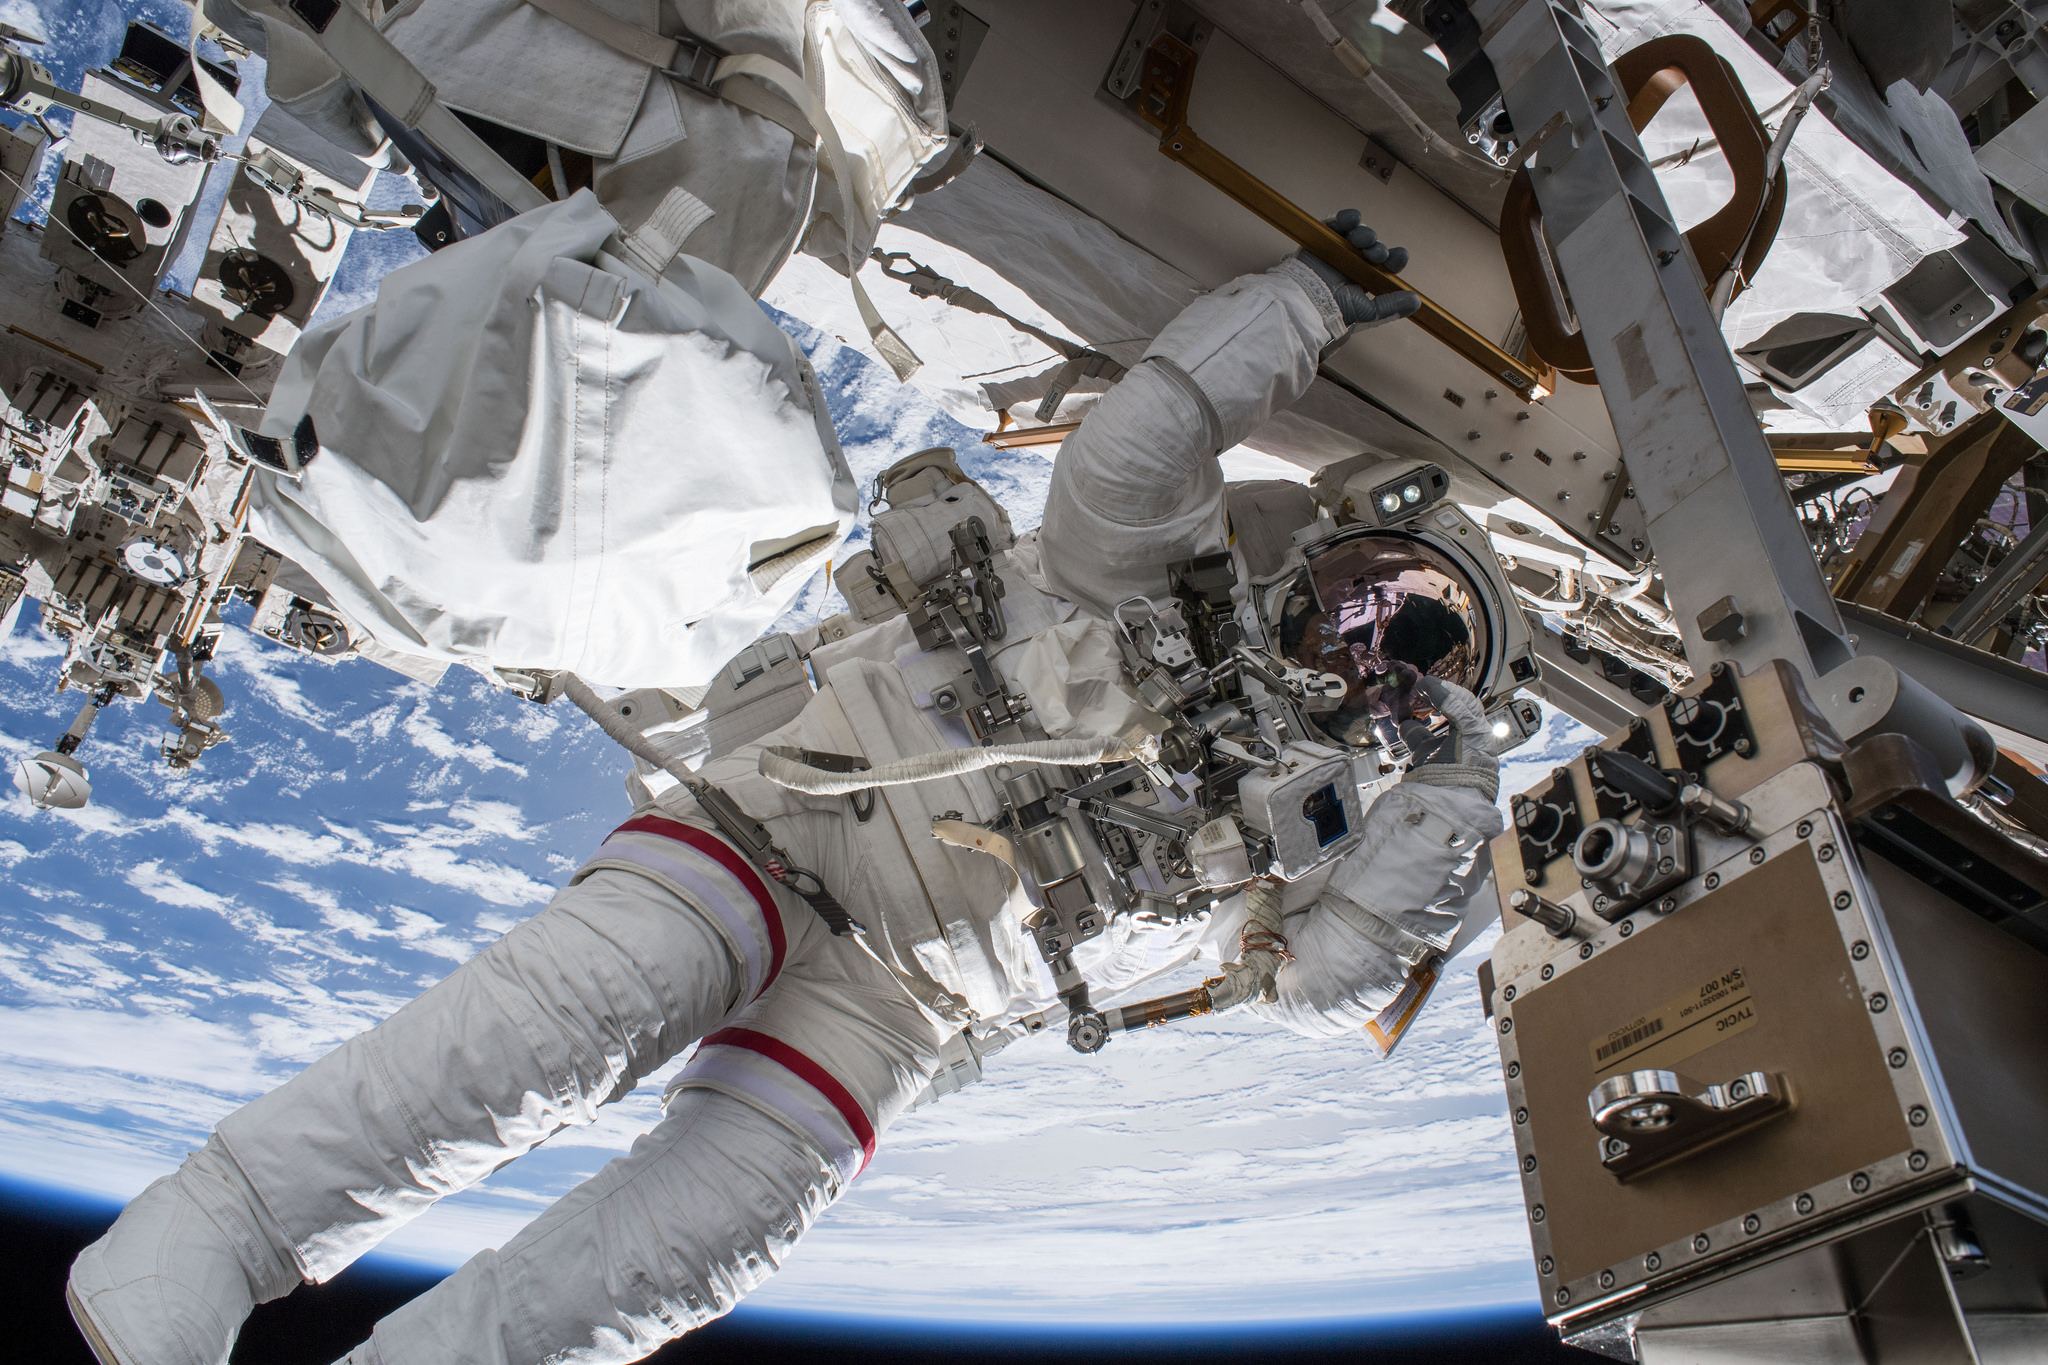 NASA astronaut Drew Feustel, shown during a spacewalk at the International Space Station March 29, 2018.